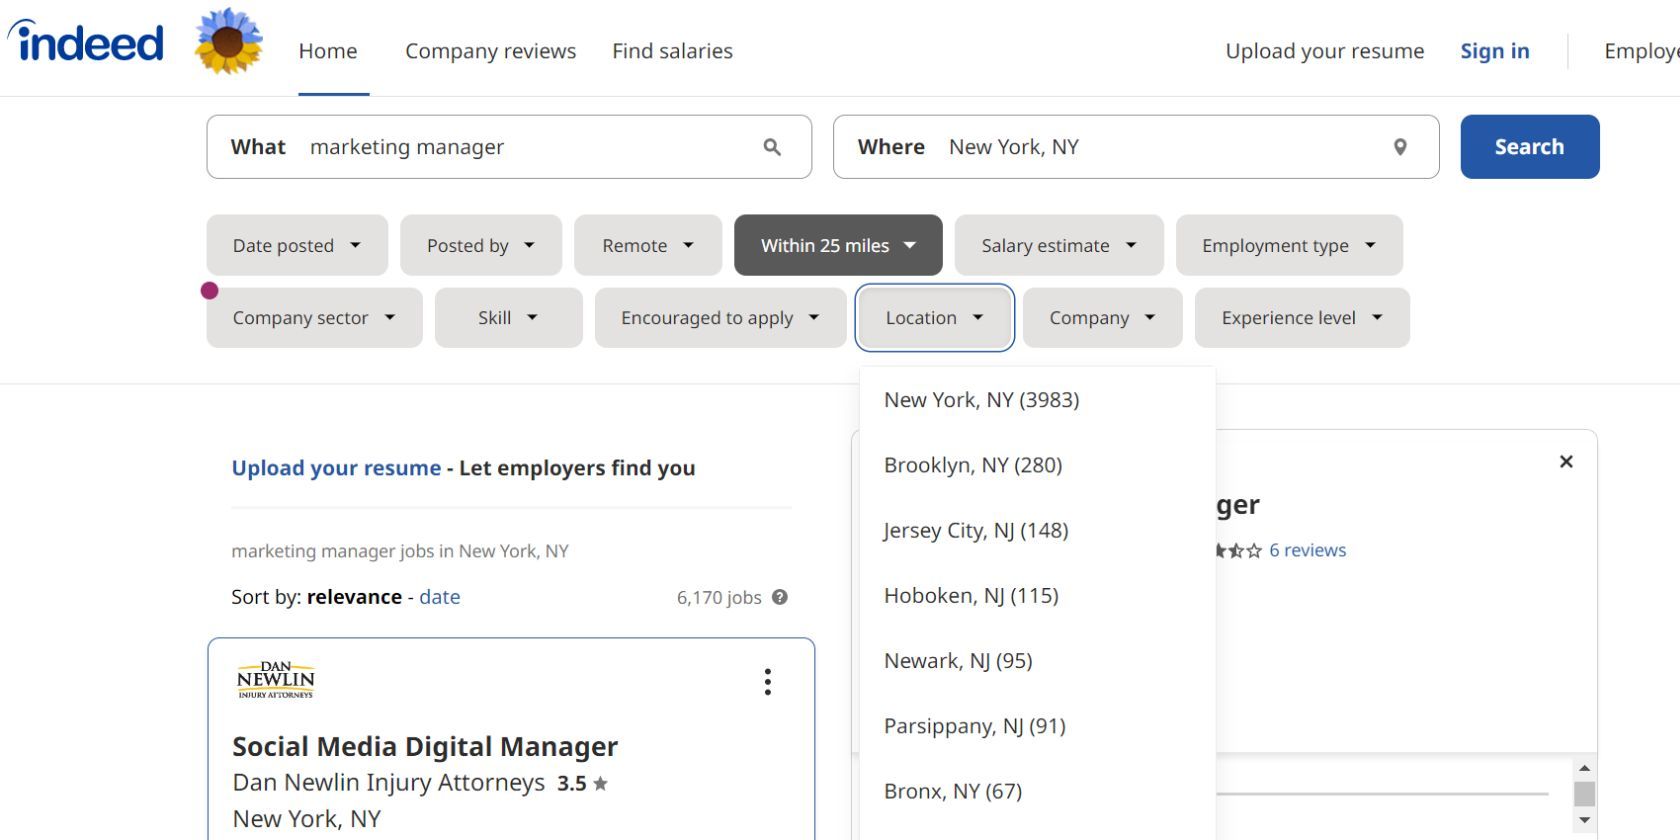 using job search filters on Indeed platform